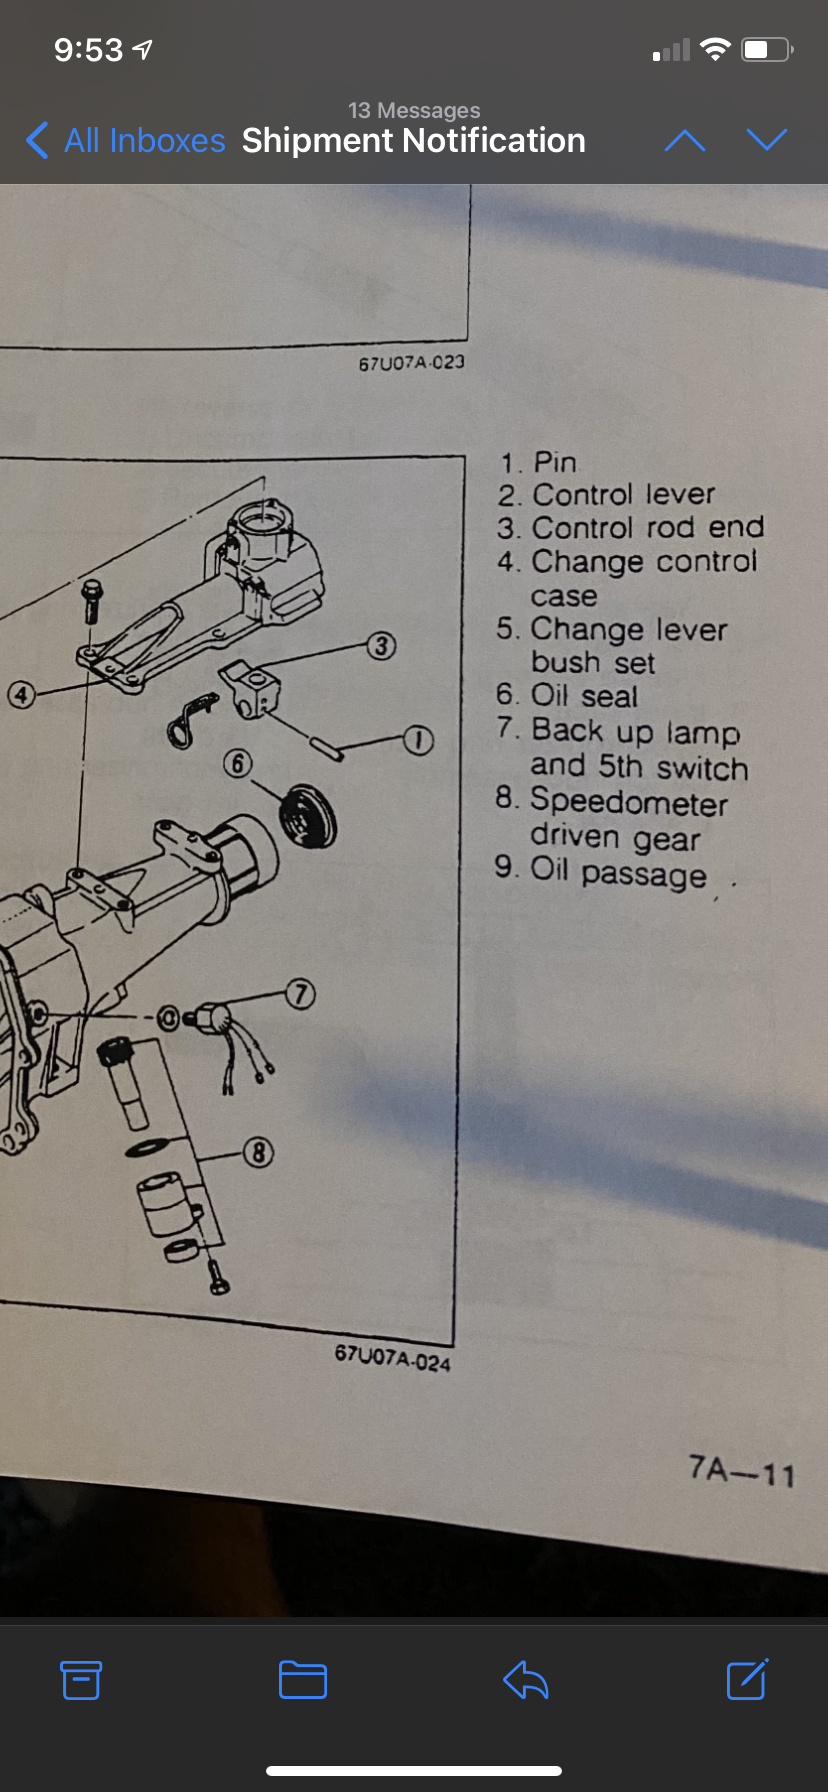 Drivetrain - Looking to buy a change control case bolts ontop of a FC transmission - Used - 0  All Models - Nanaimo, BC V9R0C4, Canada